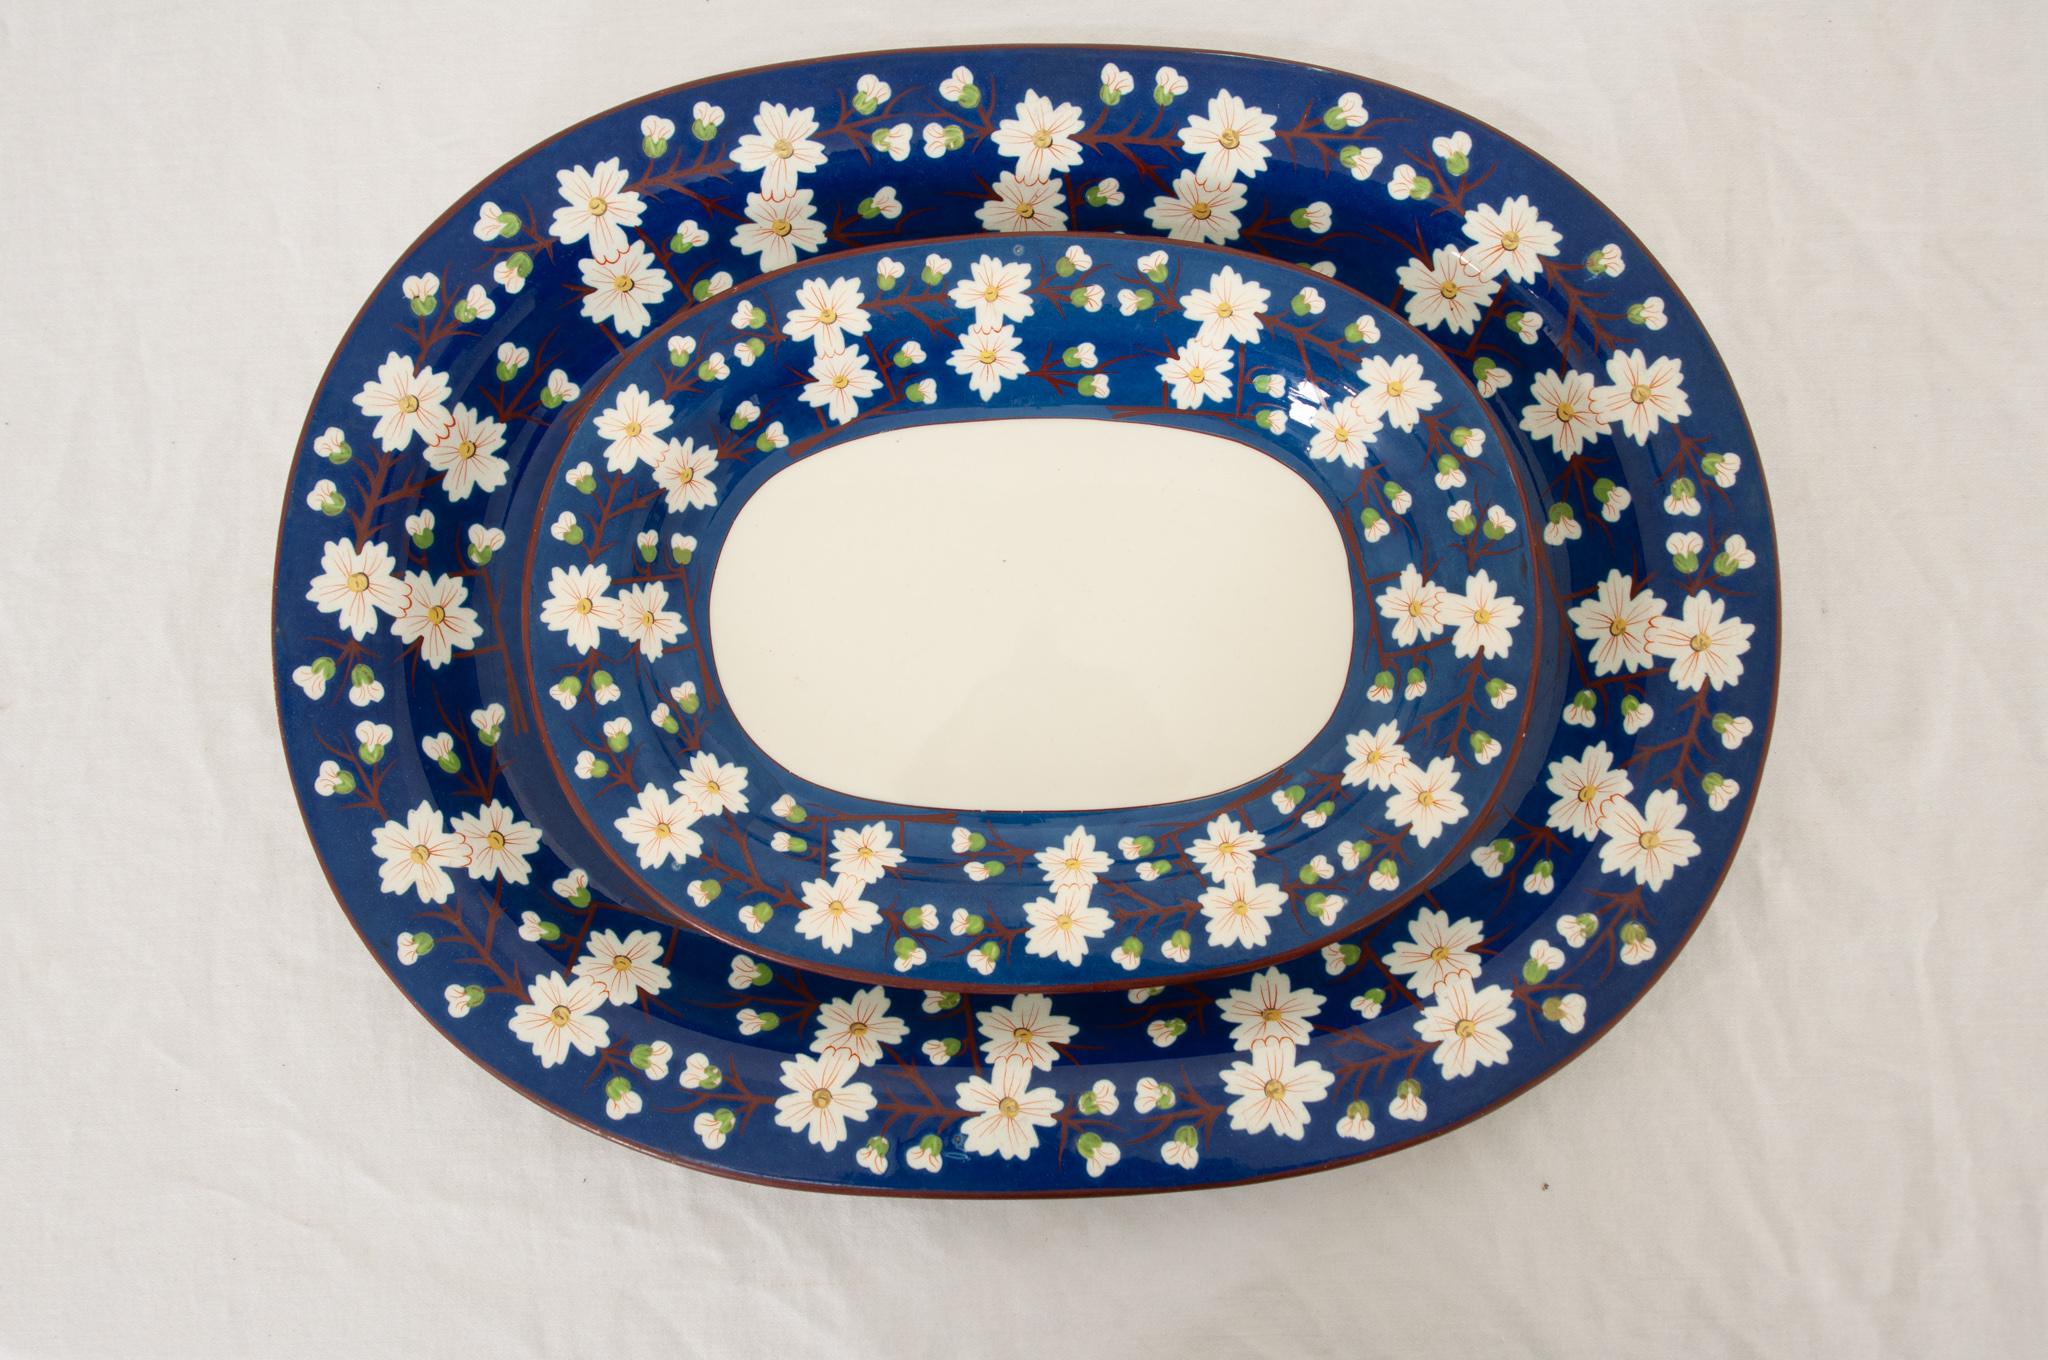 A rare pair of early 19th century Wedgwood pearlware platters made in England circa 1820.  These splendid platters feature a rich lustrous cobalt trim on creamware with a blue underglaze that can be seen throughout, an alternating mix of white